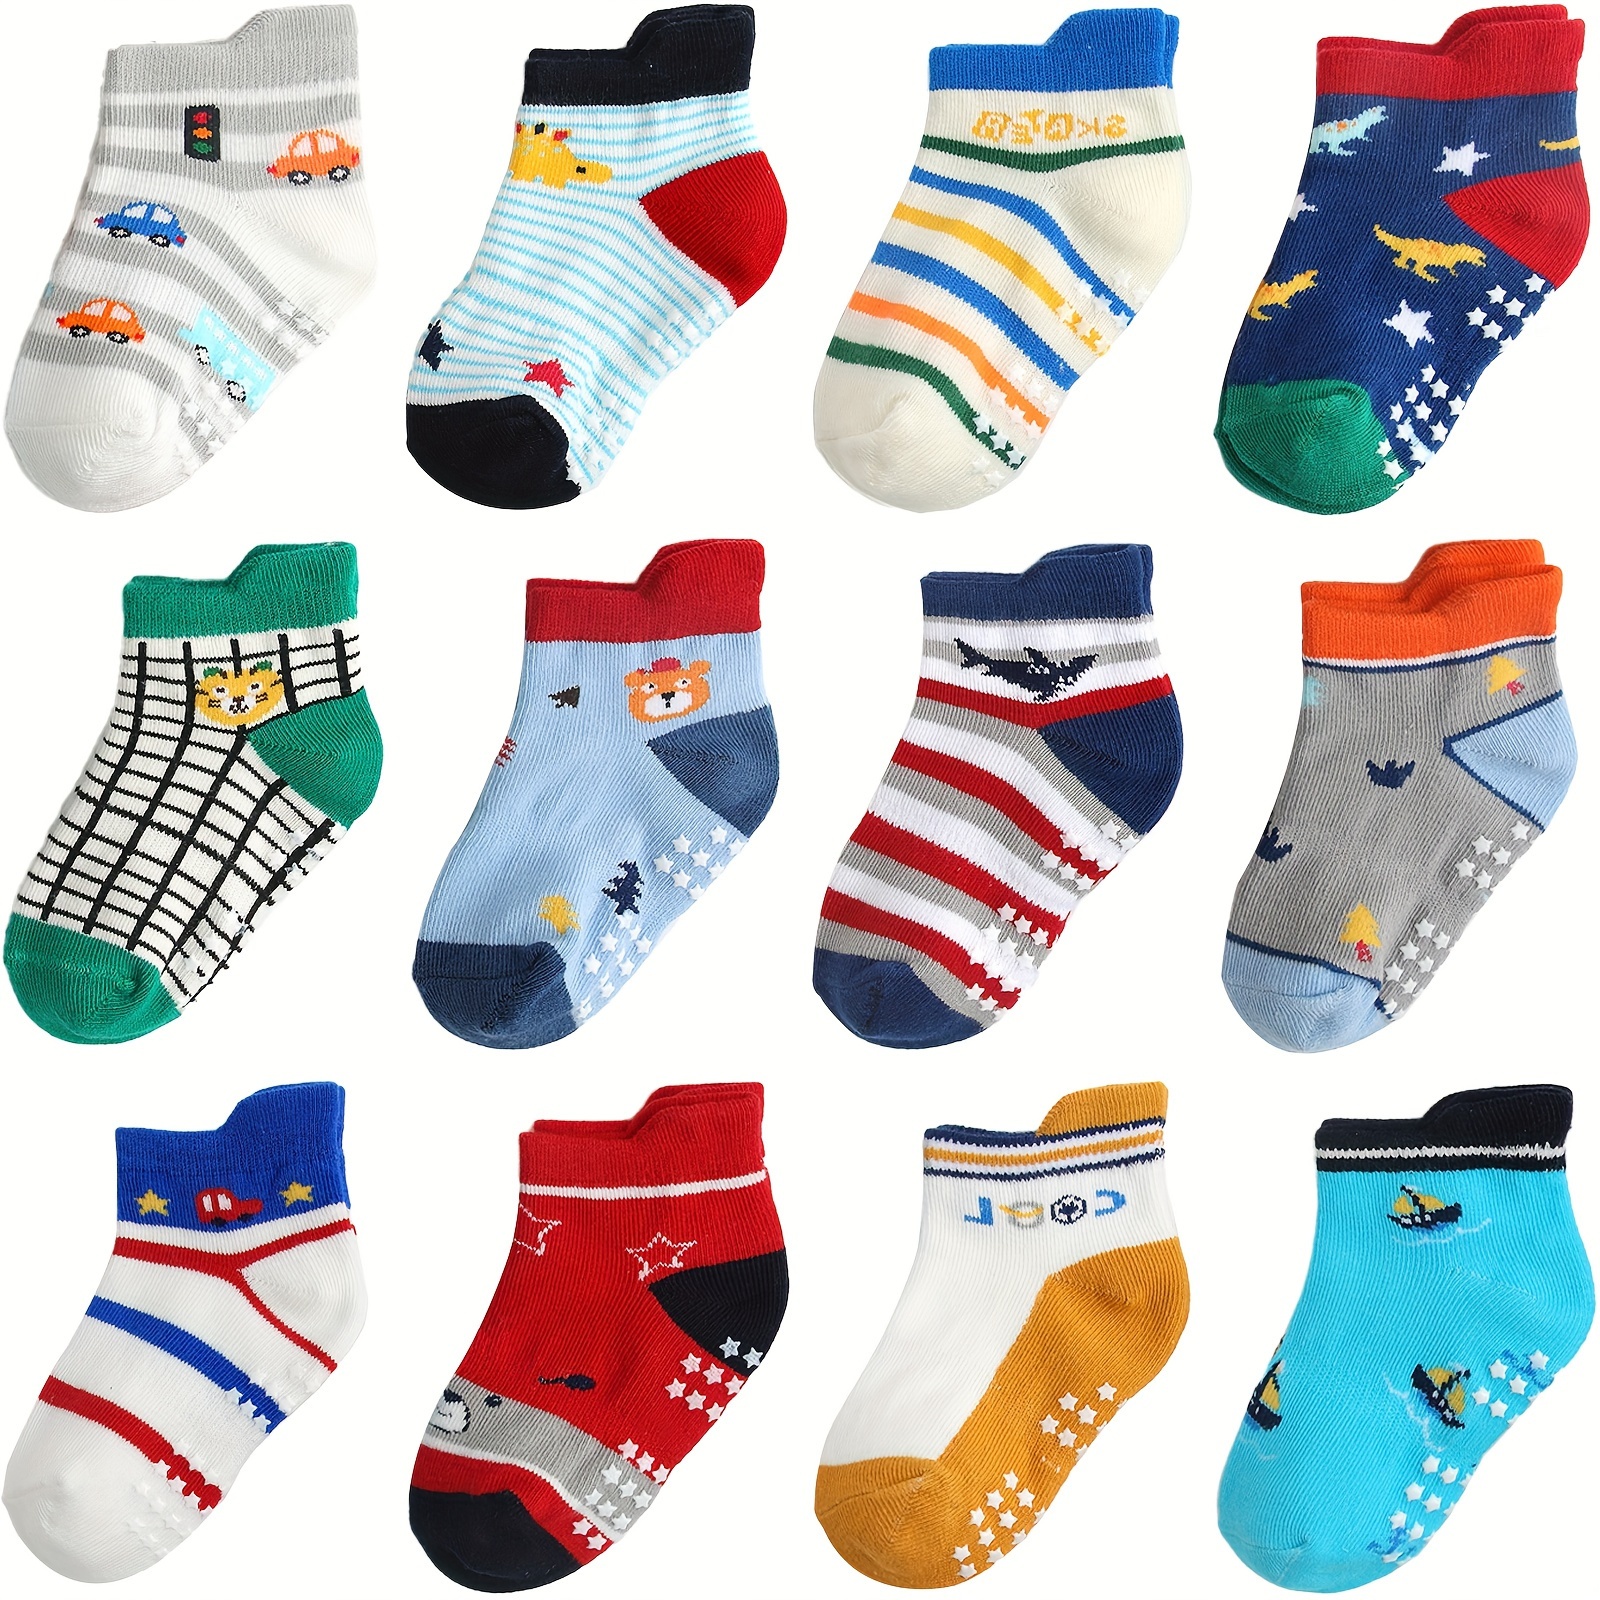 

12 Pairs Of Kid's Cotton Blend Fashion Cute Pattern Low-cut Socks, Comfy Breathable Non-slip Socks For Daily Wearing